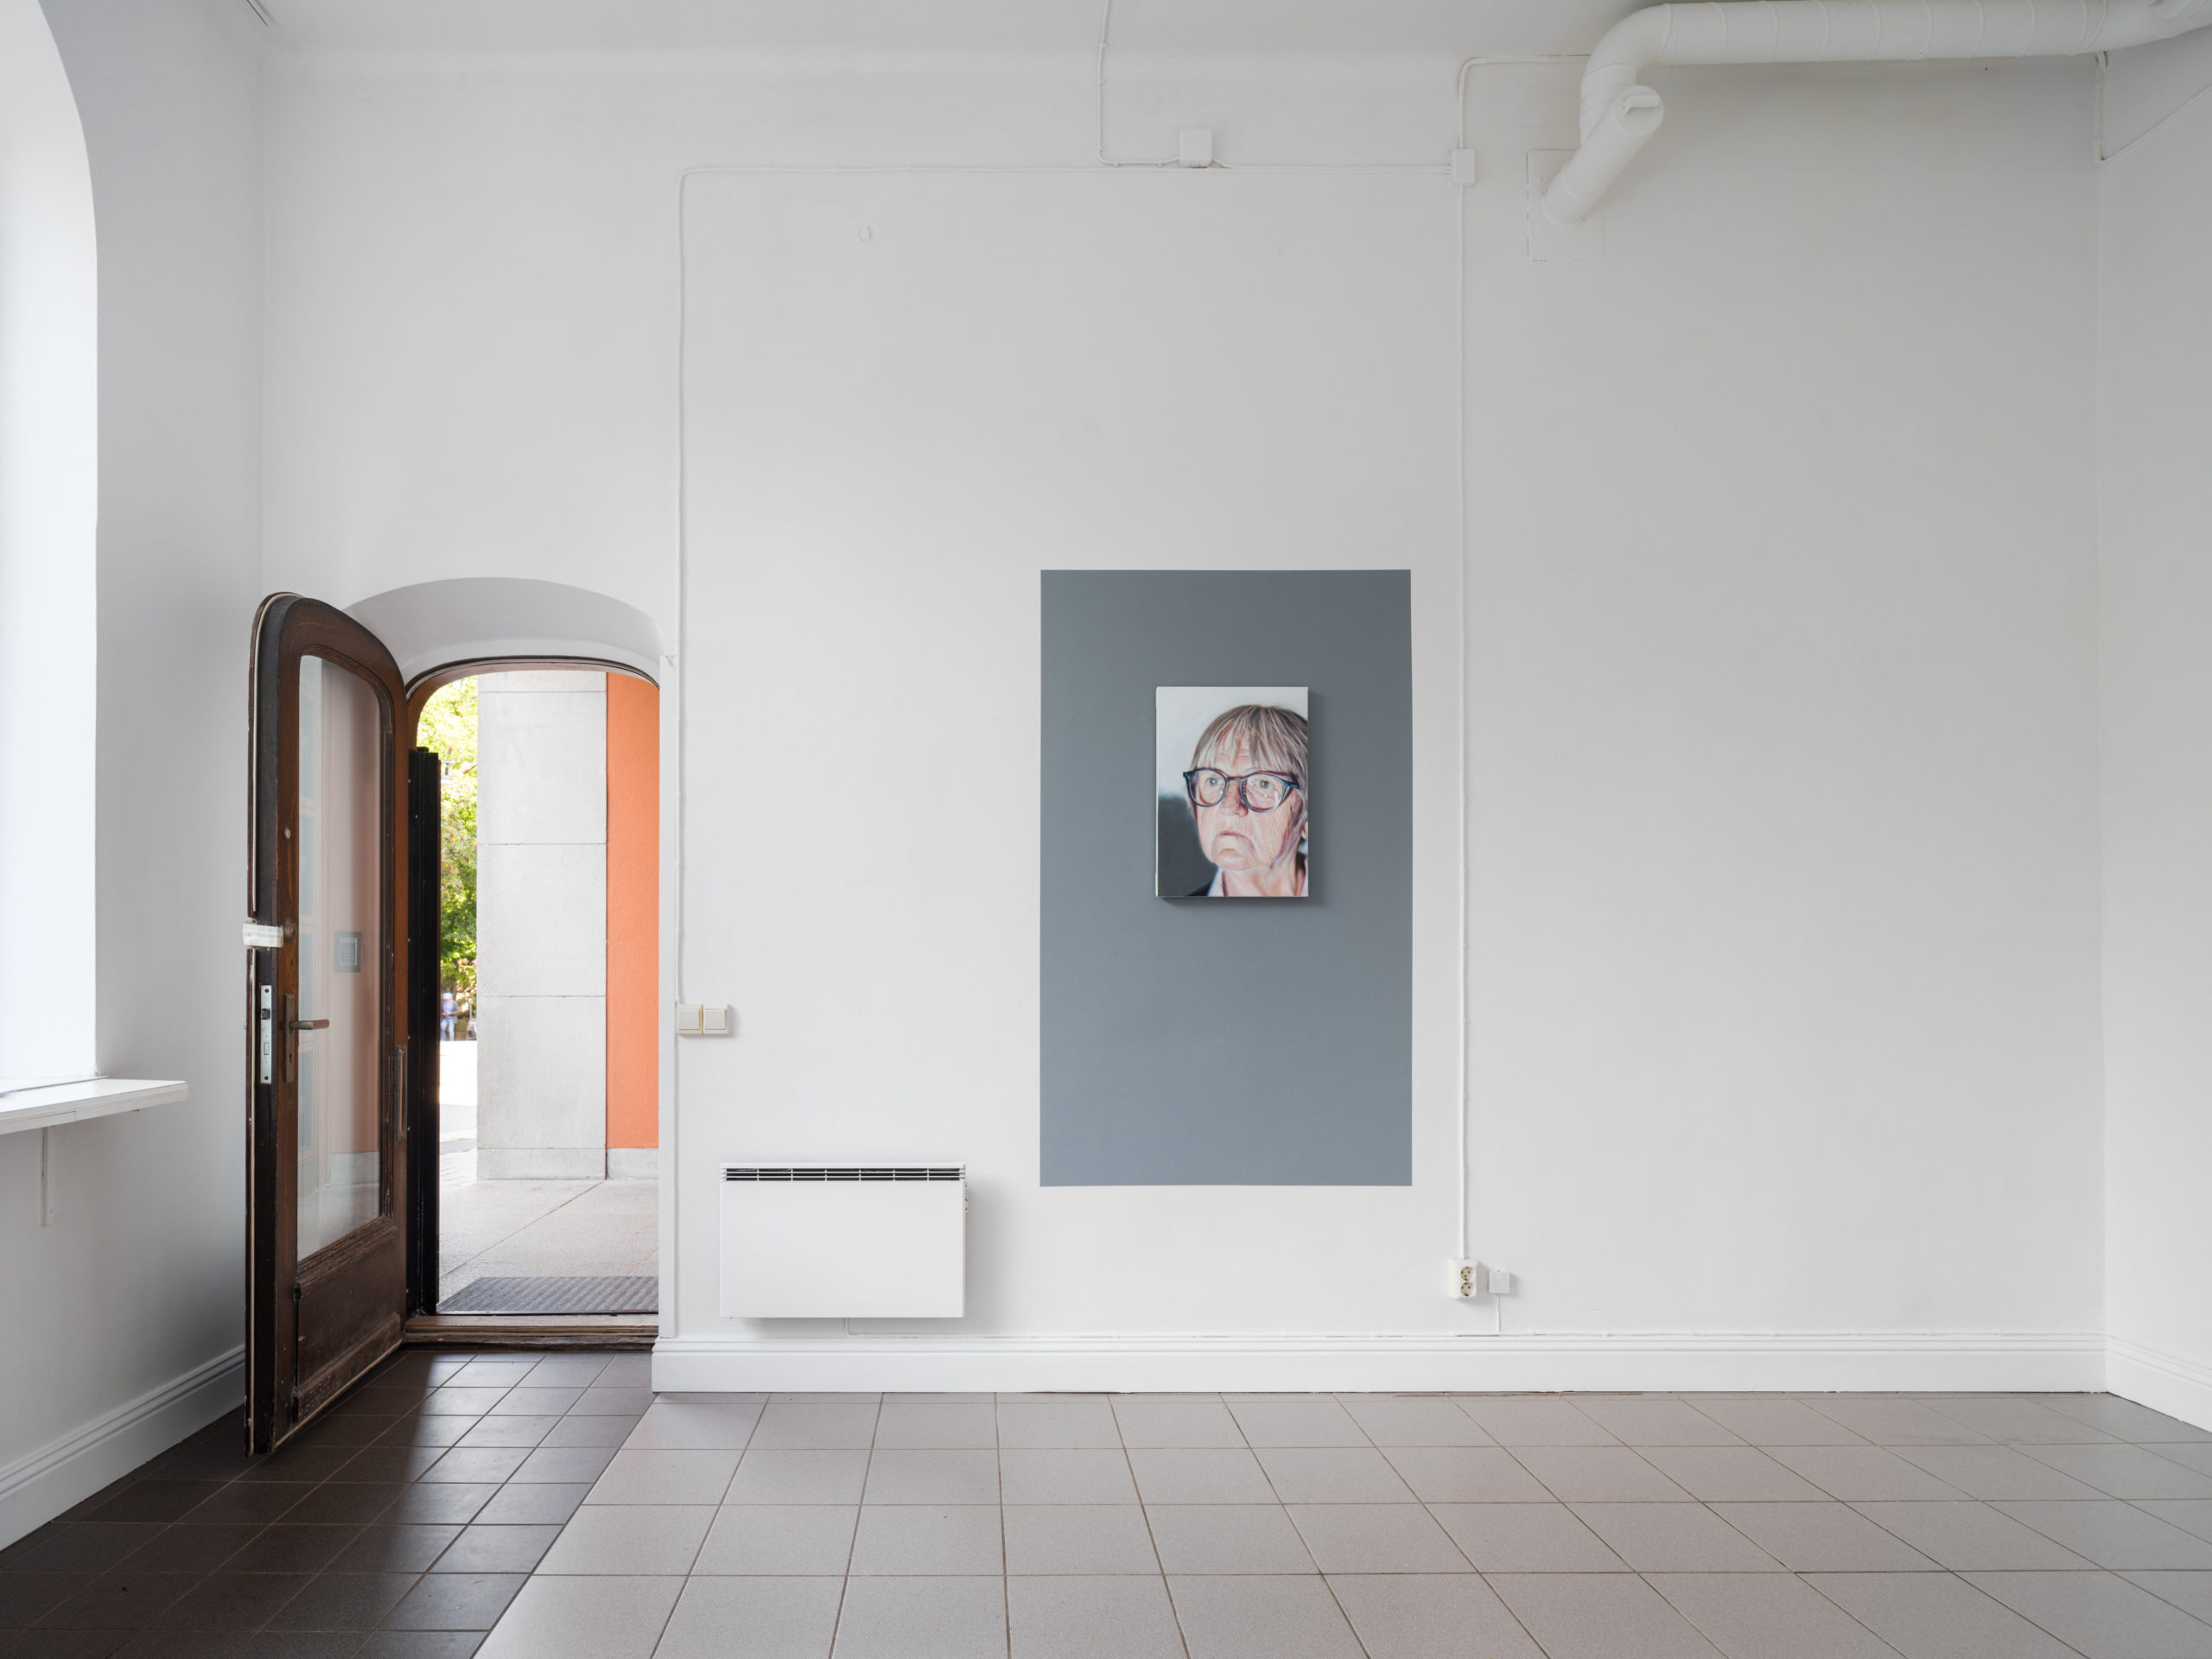 Installation view from the exhibition "Mothers".
Gunilla, 2021. Oil on canvas, 56 x 40 cm. Photo: Jean Baptiste Béranger